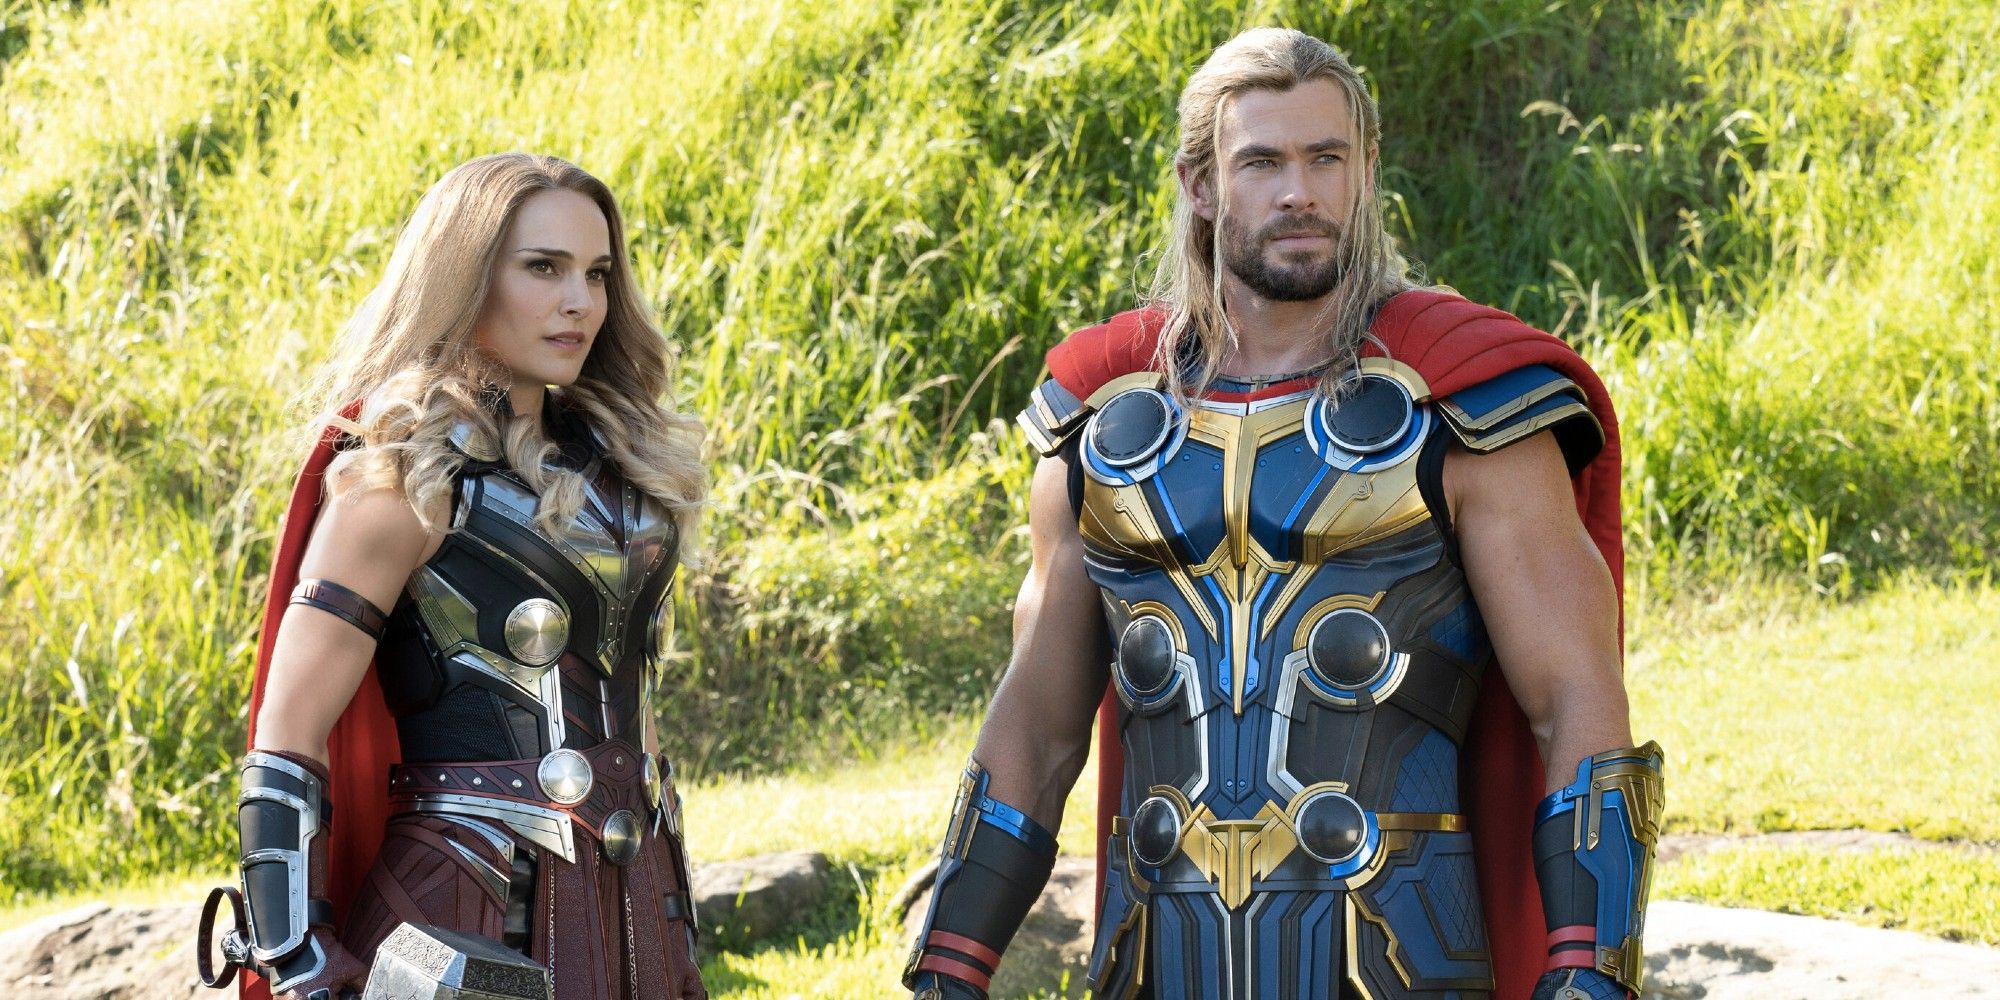 Natalie Portman and Chris Hemsworth as Jane Foster and Thor Odinson in 'Thor: Love and Thunder'